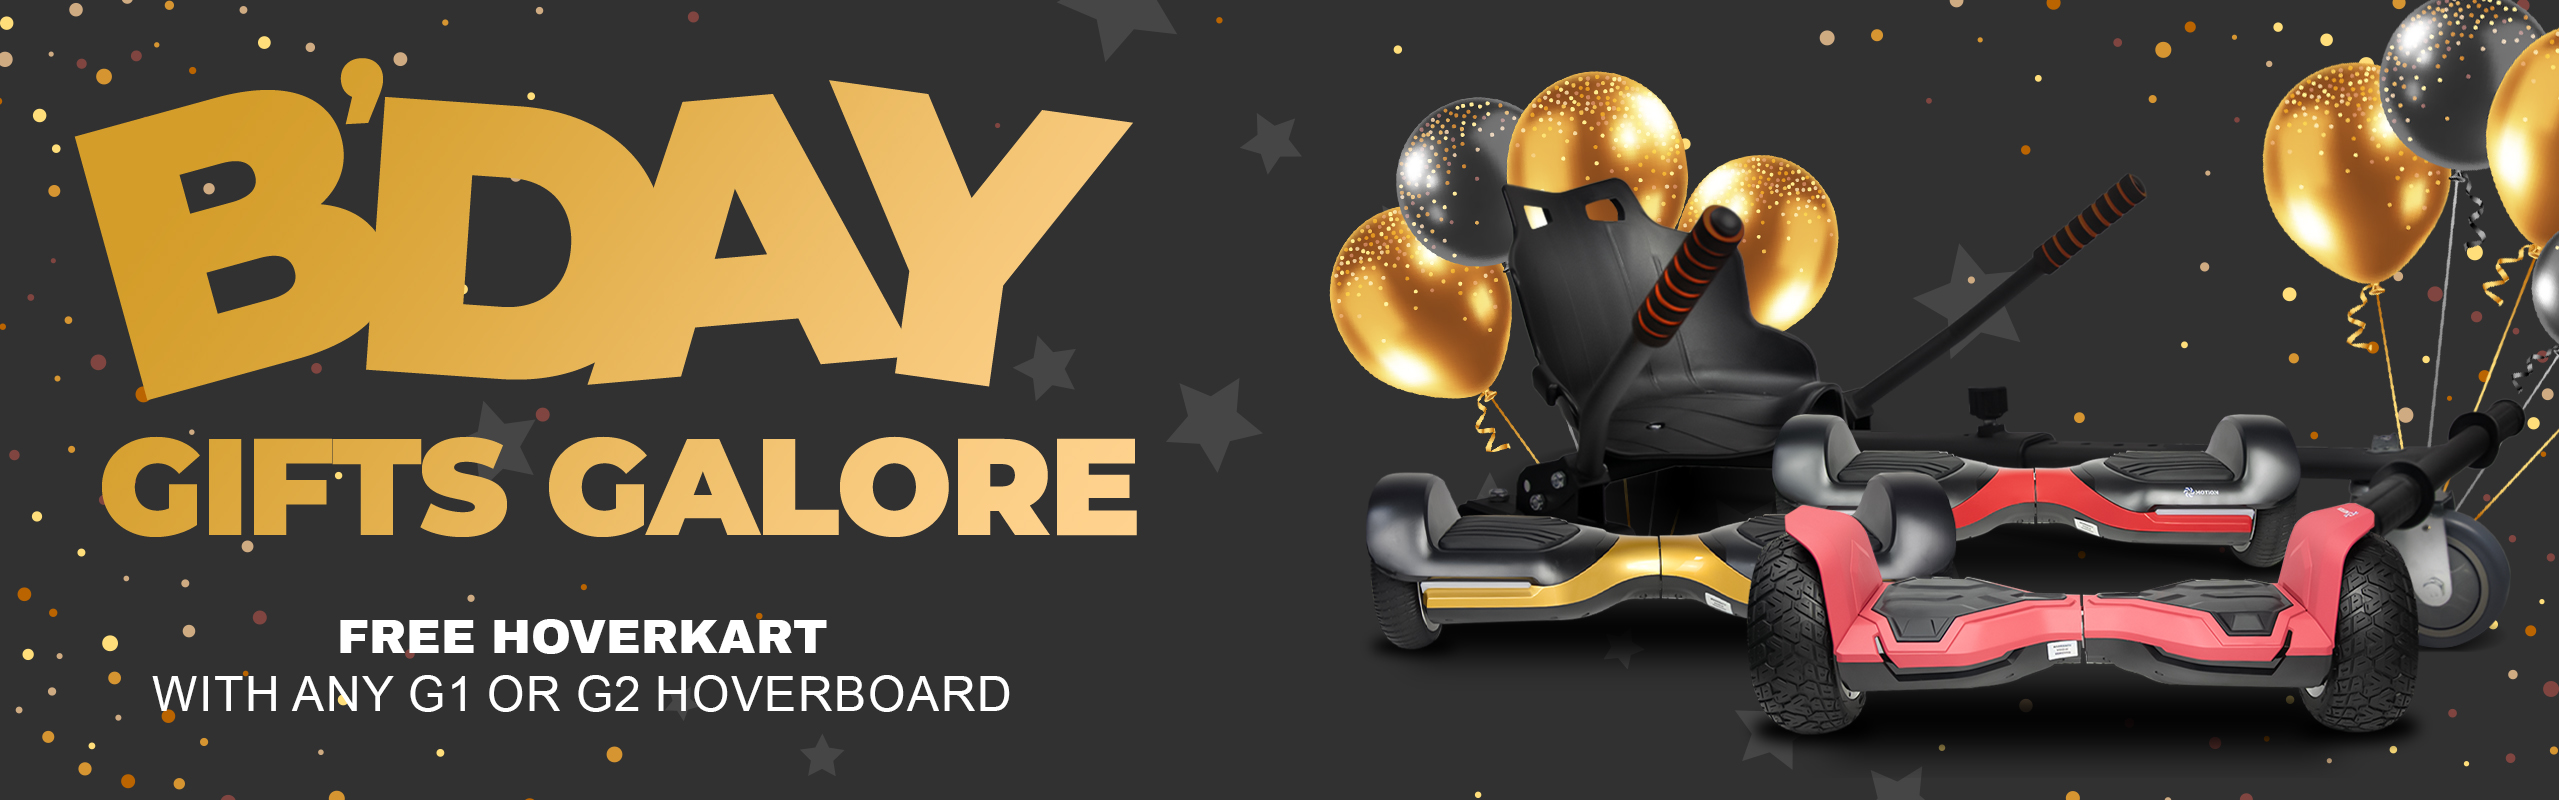 Number 1 Official Hoverboards for Kids Company in the UK